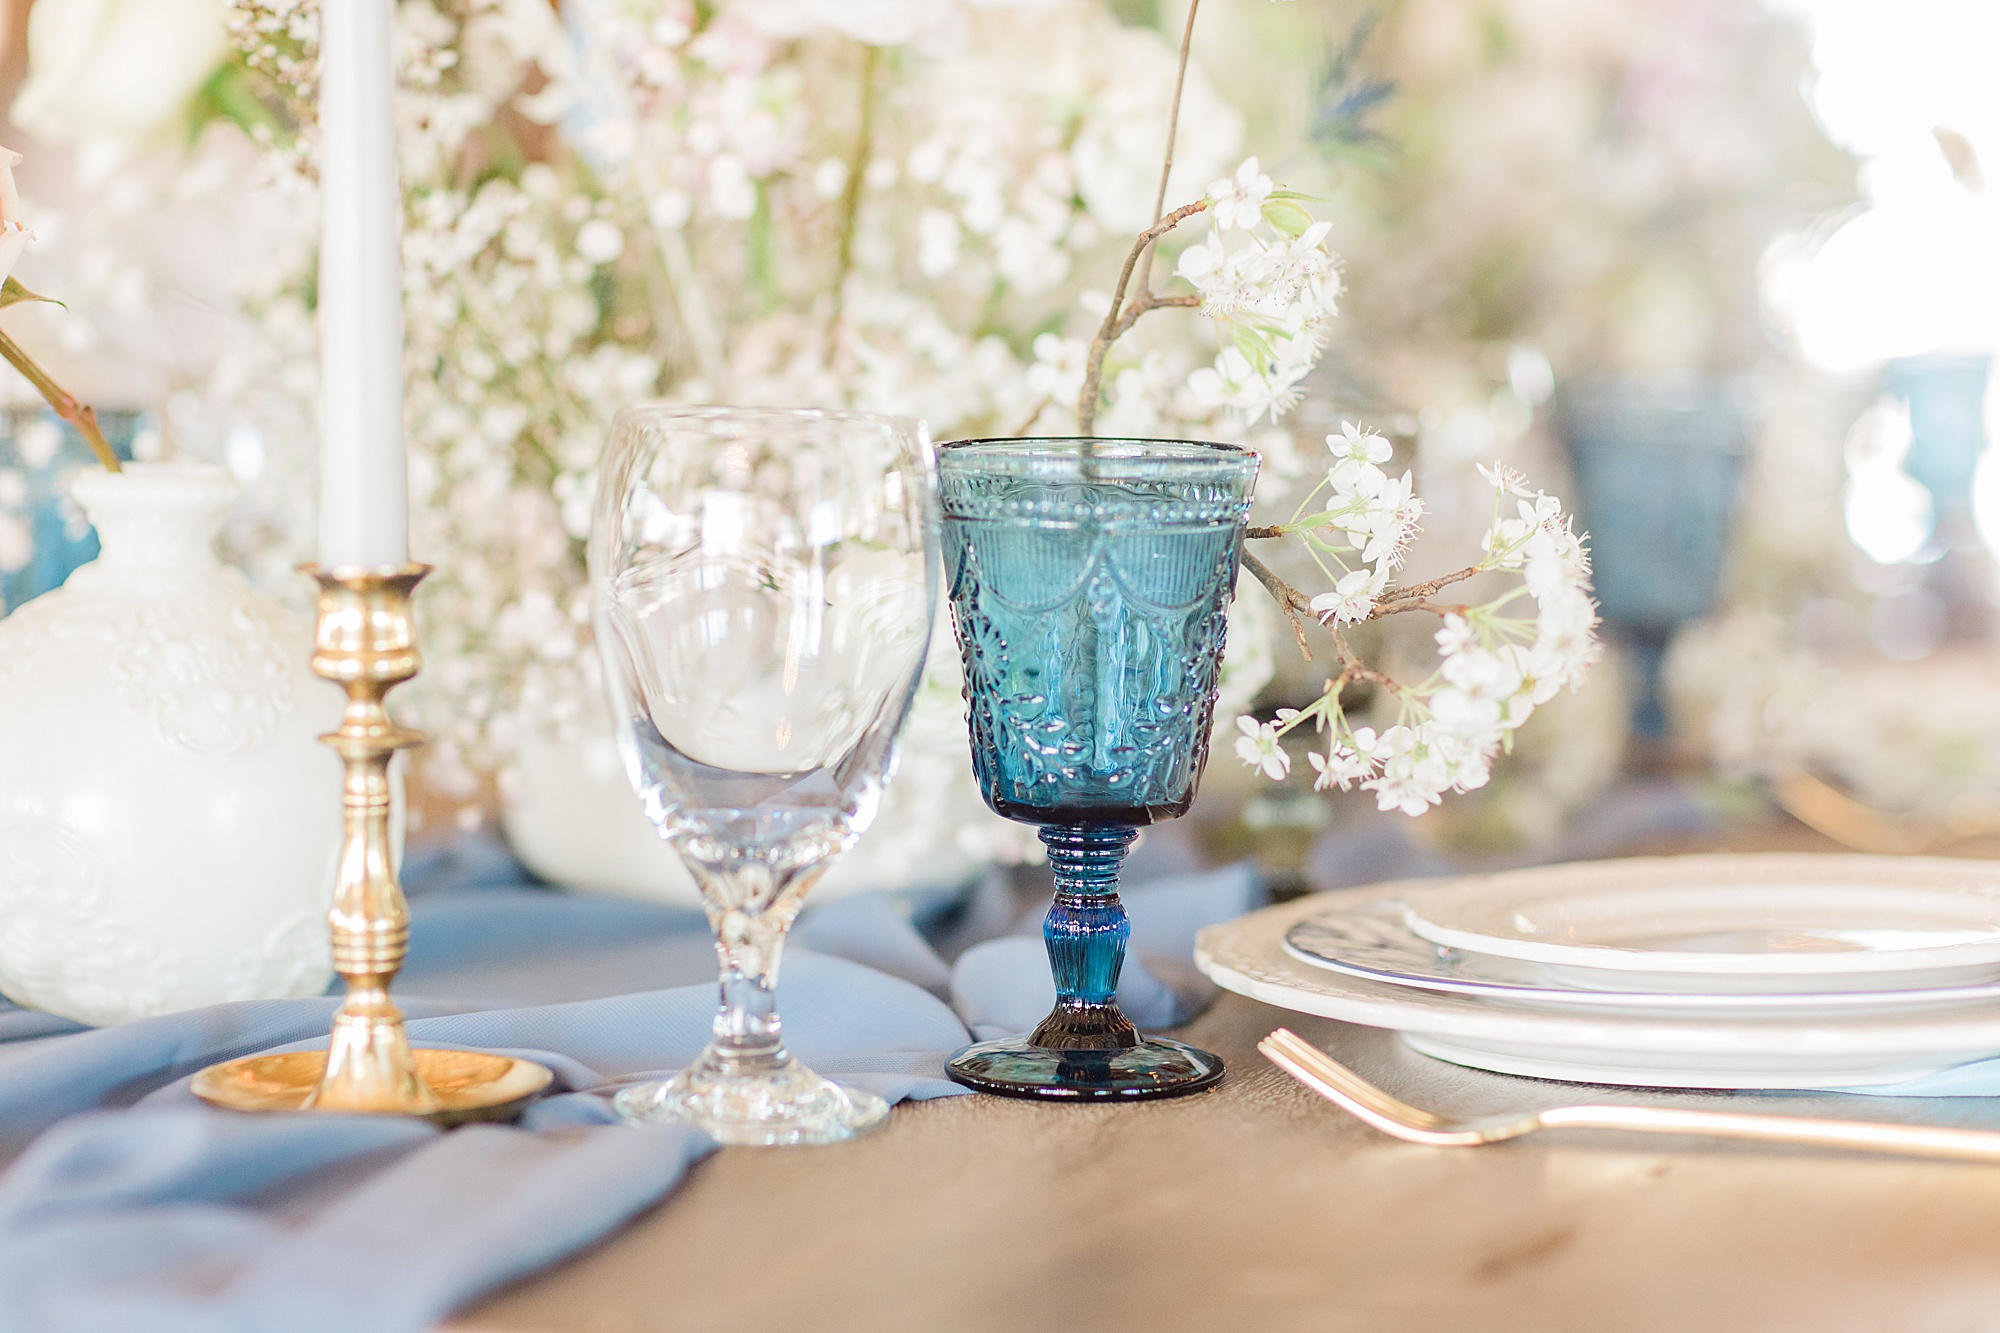 wedding reception place settings with vintage blue glasses